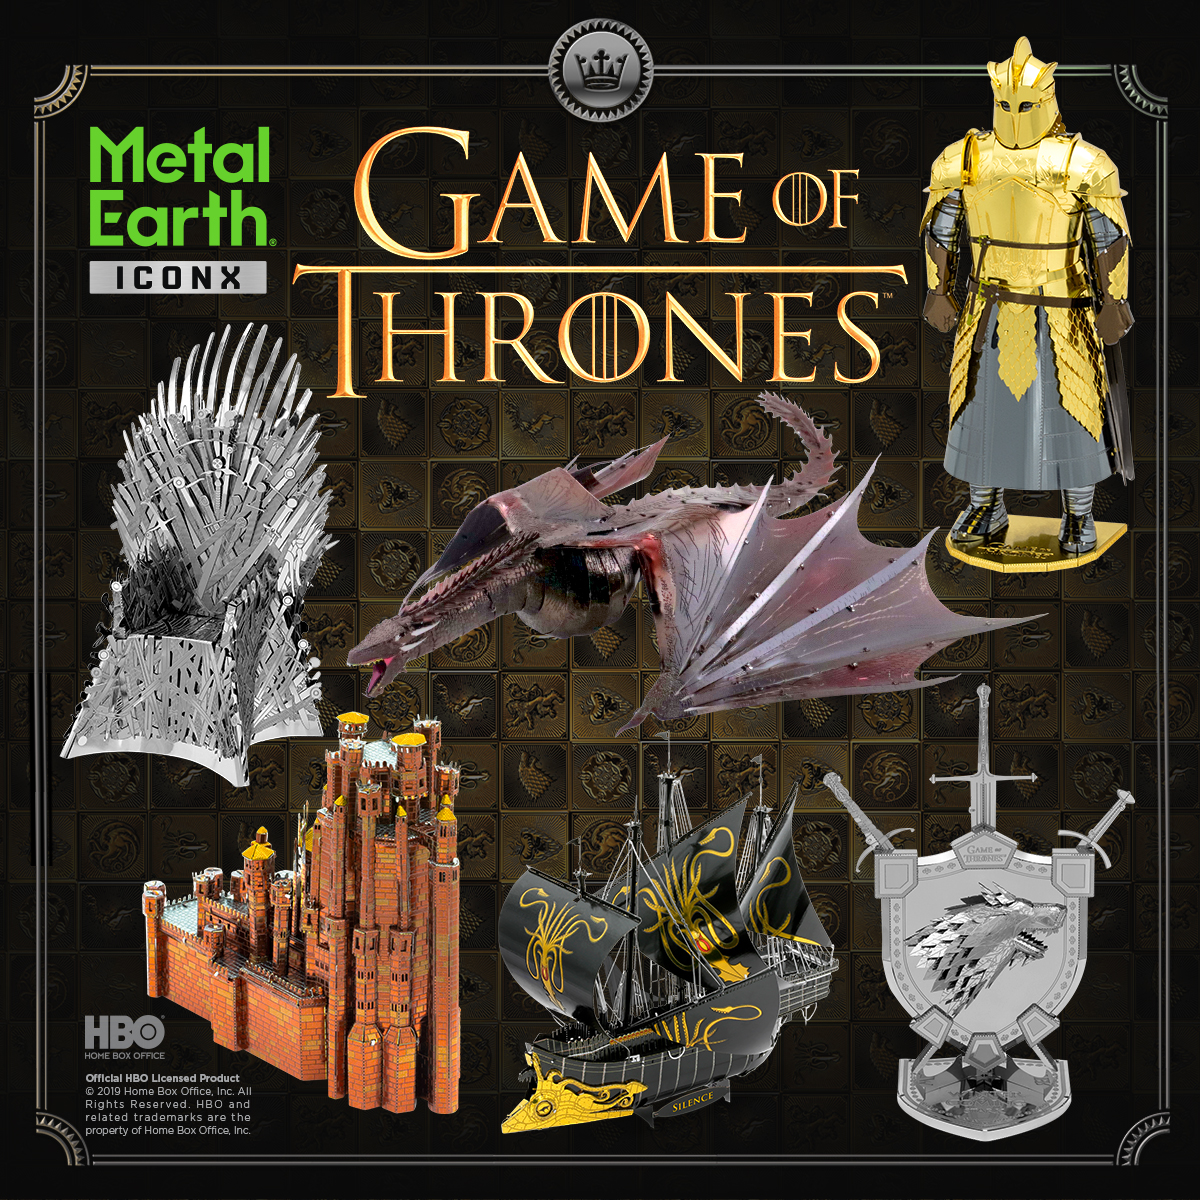 Introducing … Game of Thrones by Metal Earth